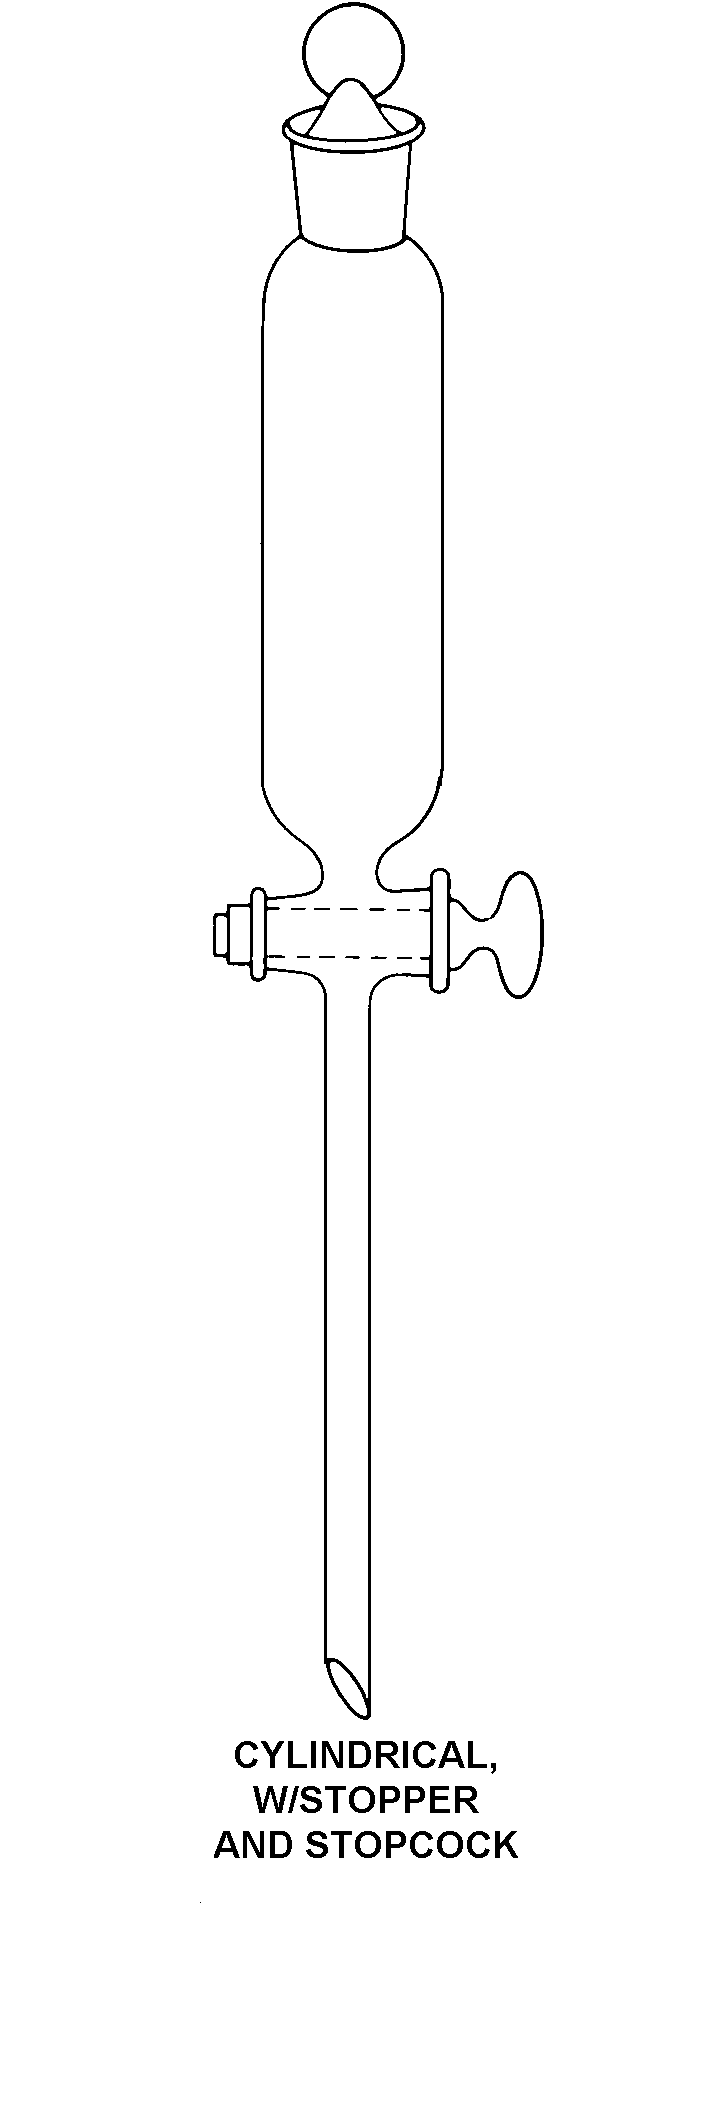 CYLINDRICAL , W/ STOPPER AND STOPCOCK style nsn 6640-00-568-4467